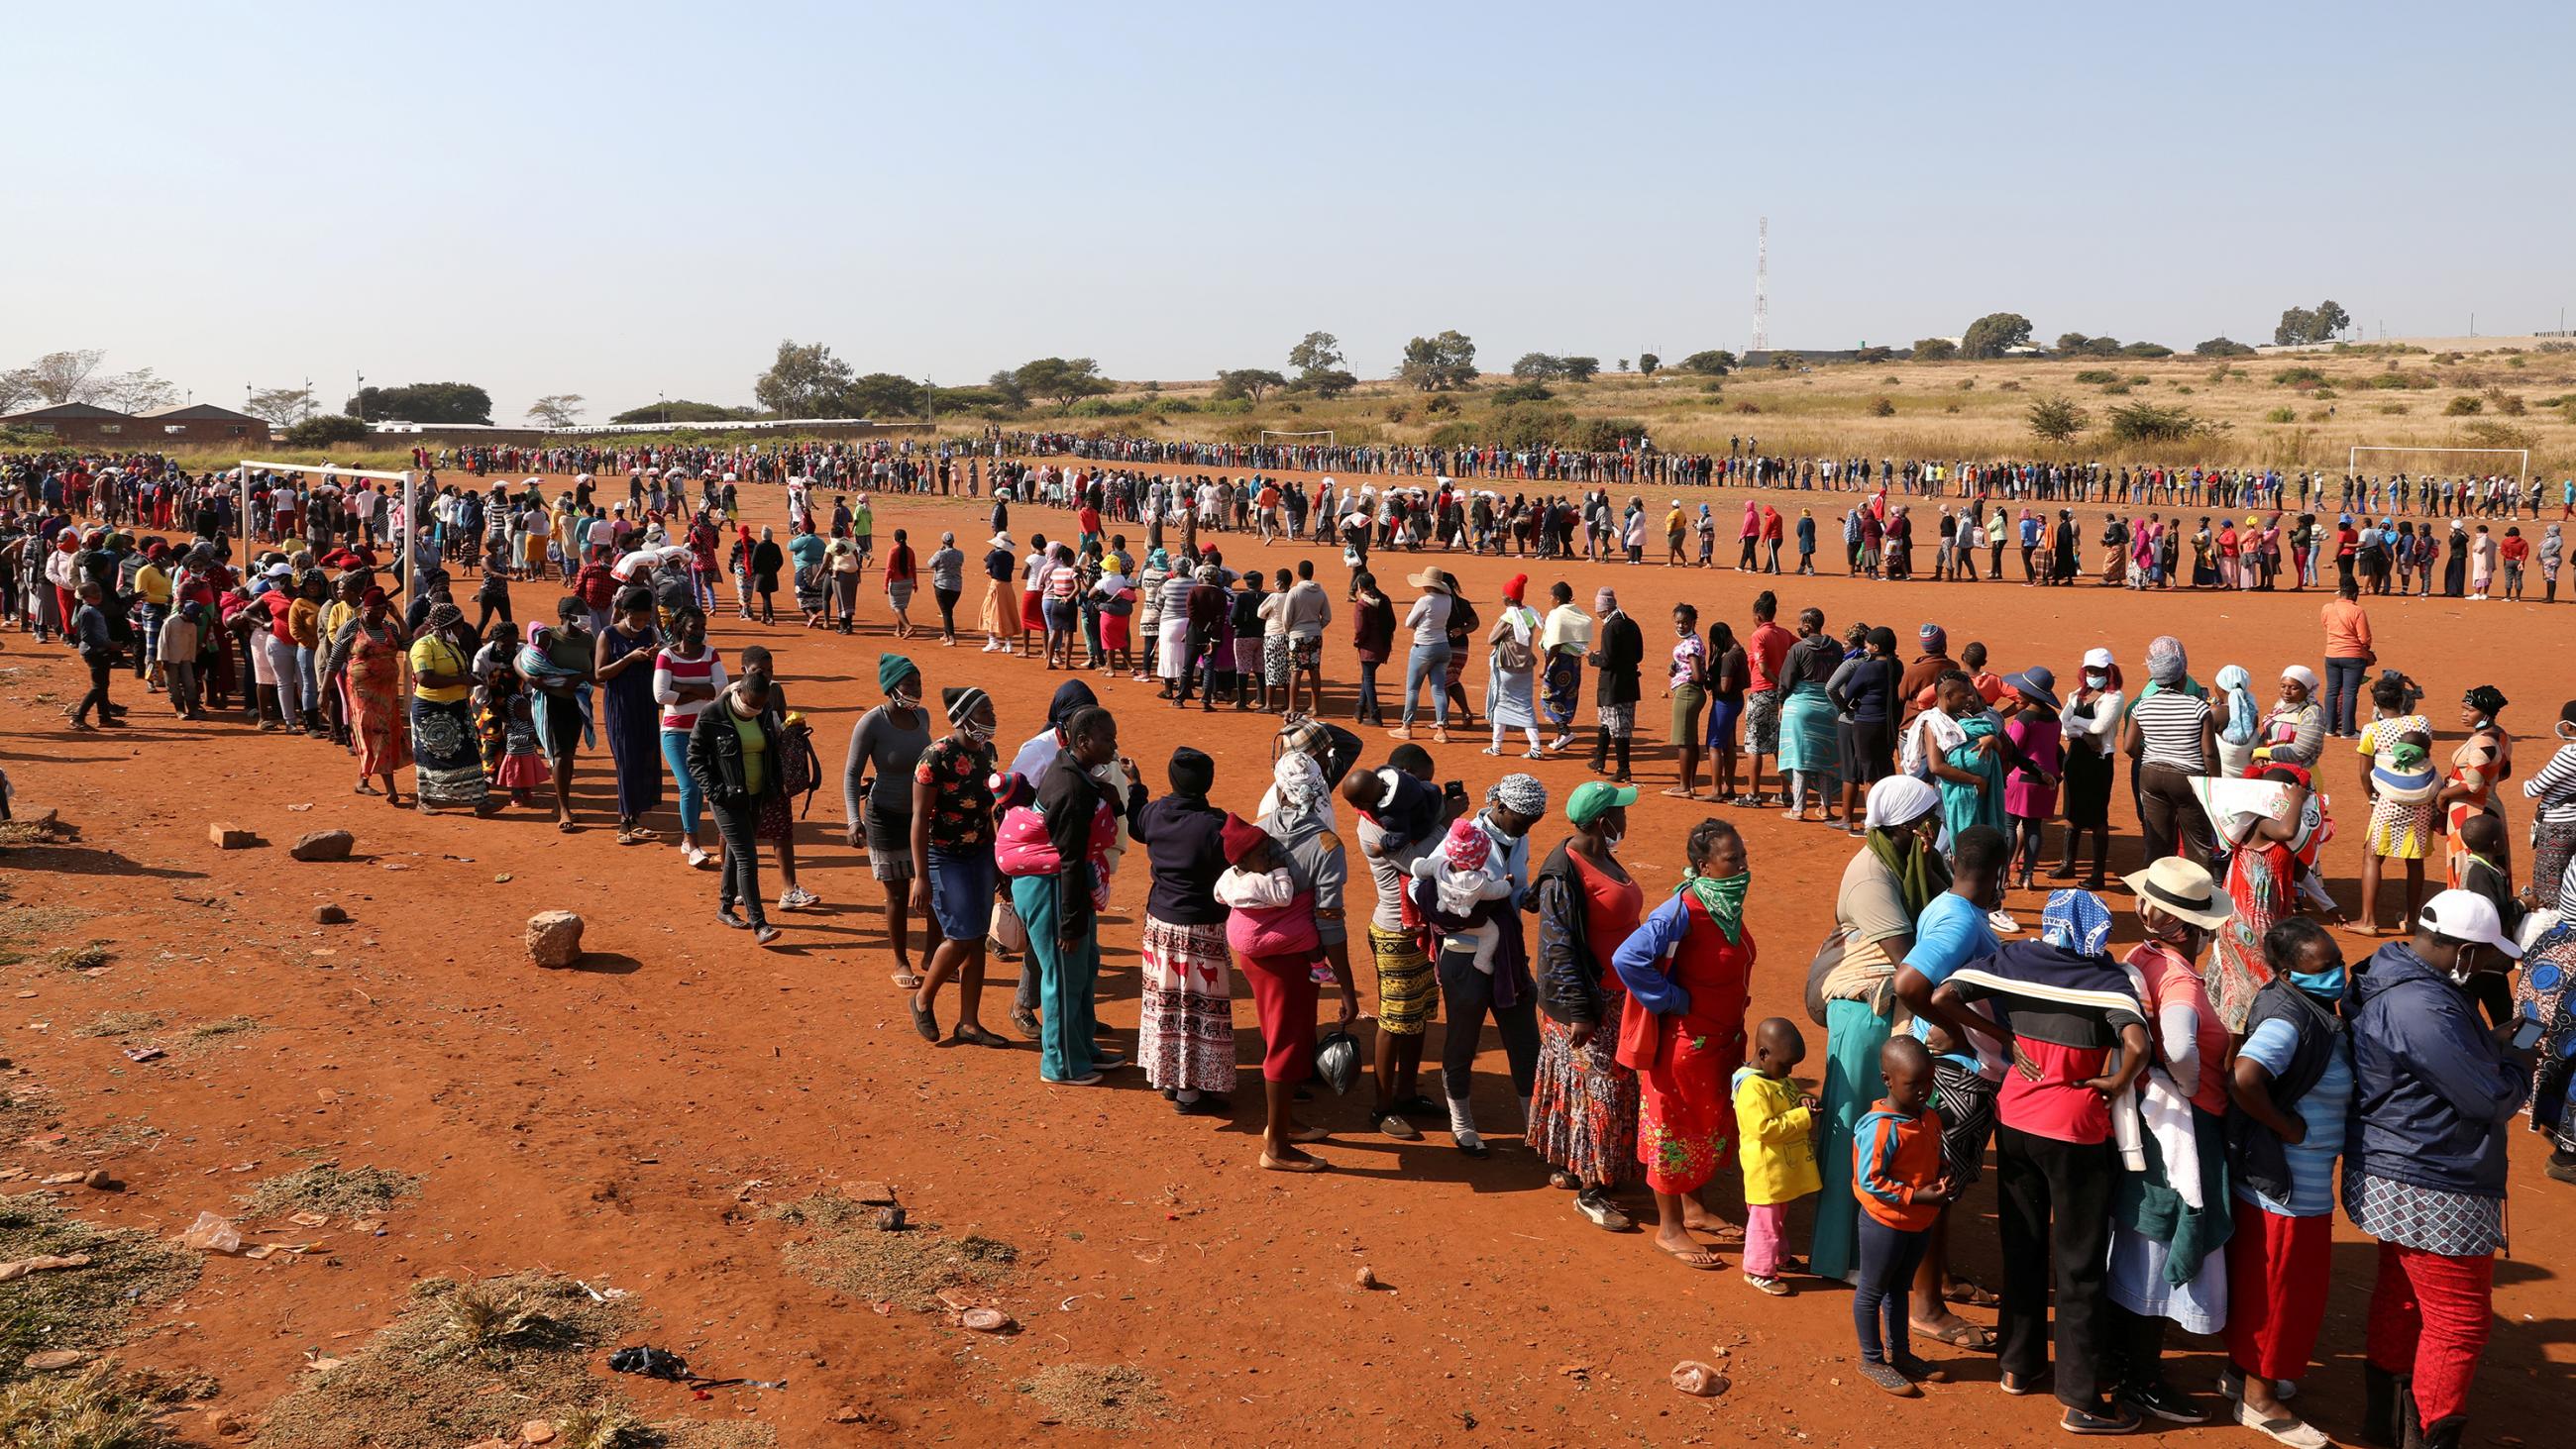 The photo is taken from a high vantage overlooking a huge crowd of people standing on line in a red soil dry plain. 